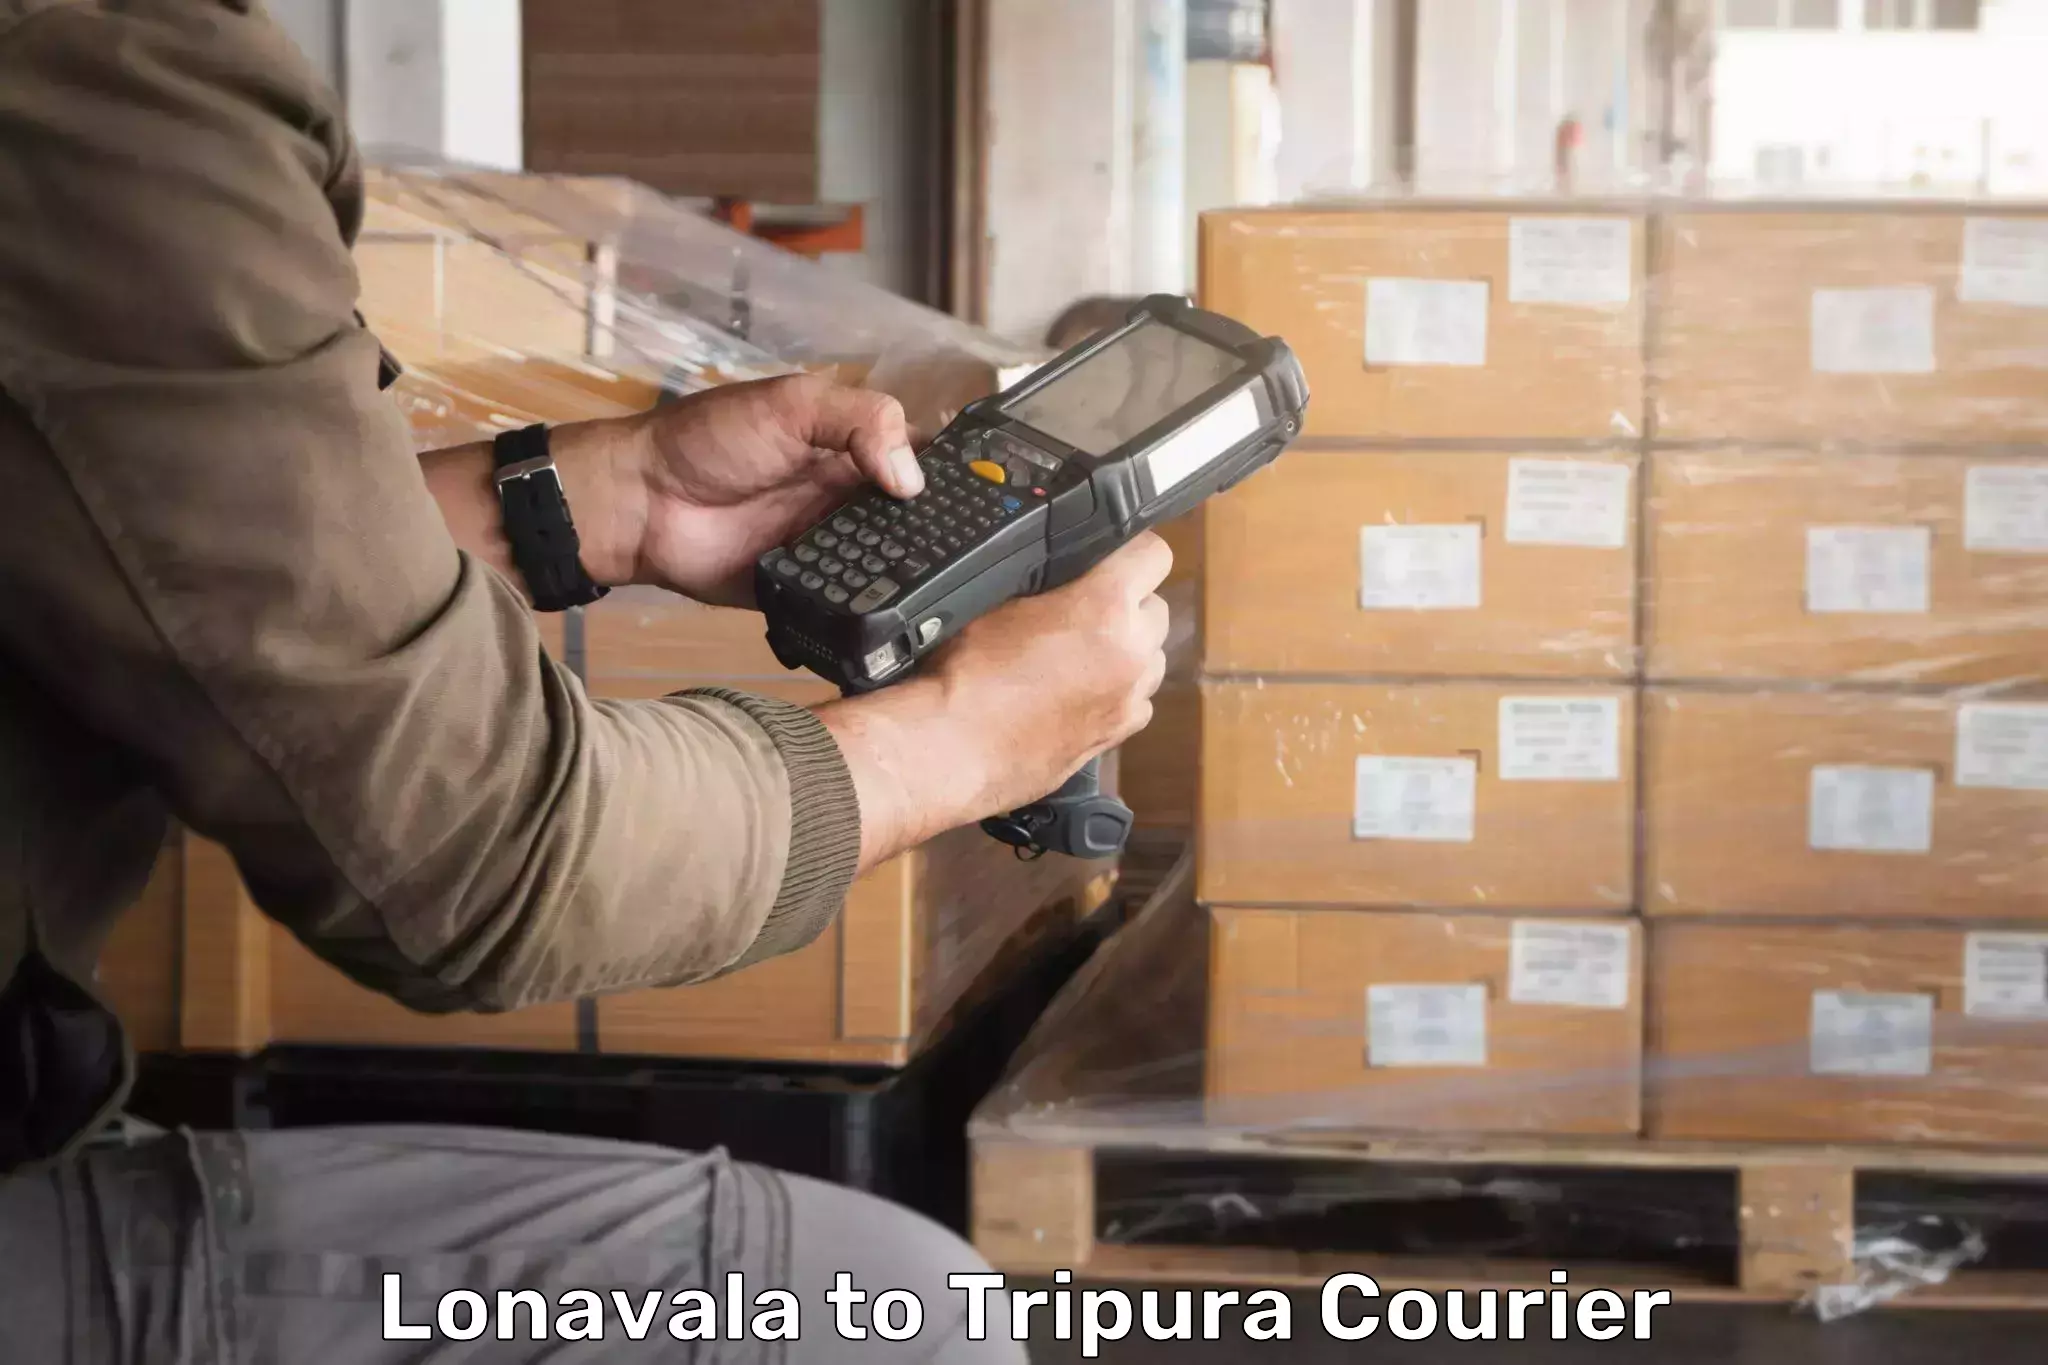 Tailored delivery services Lonavala to Udaipur Tripura